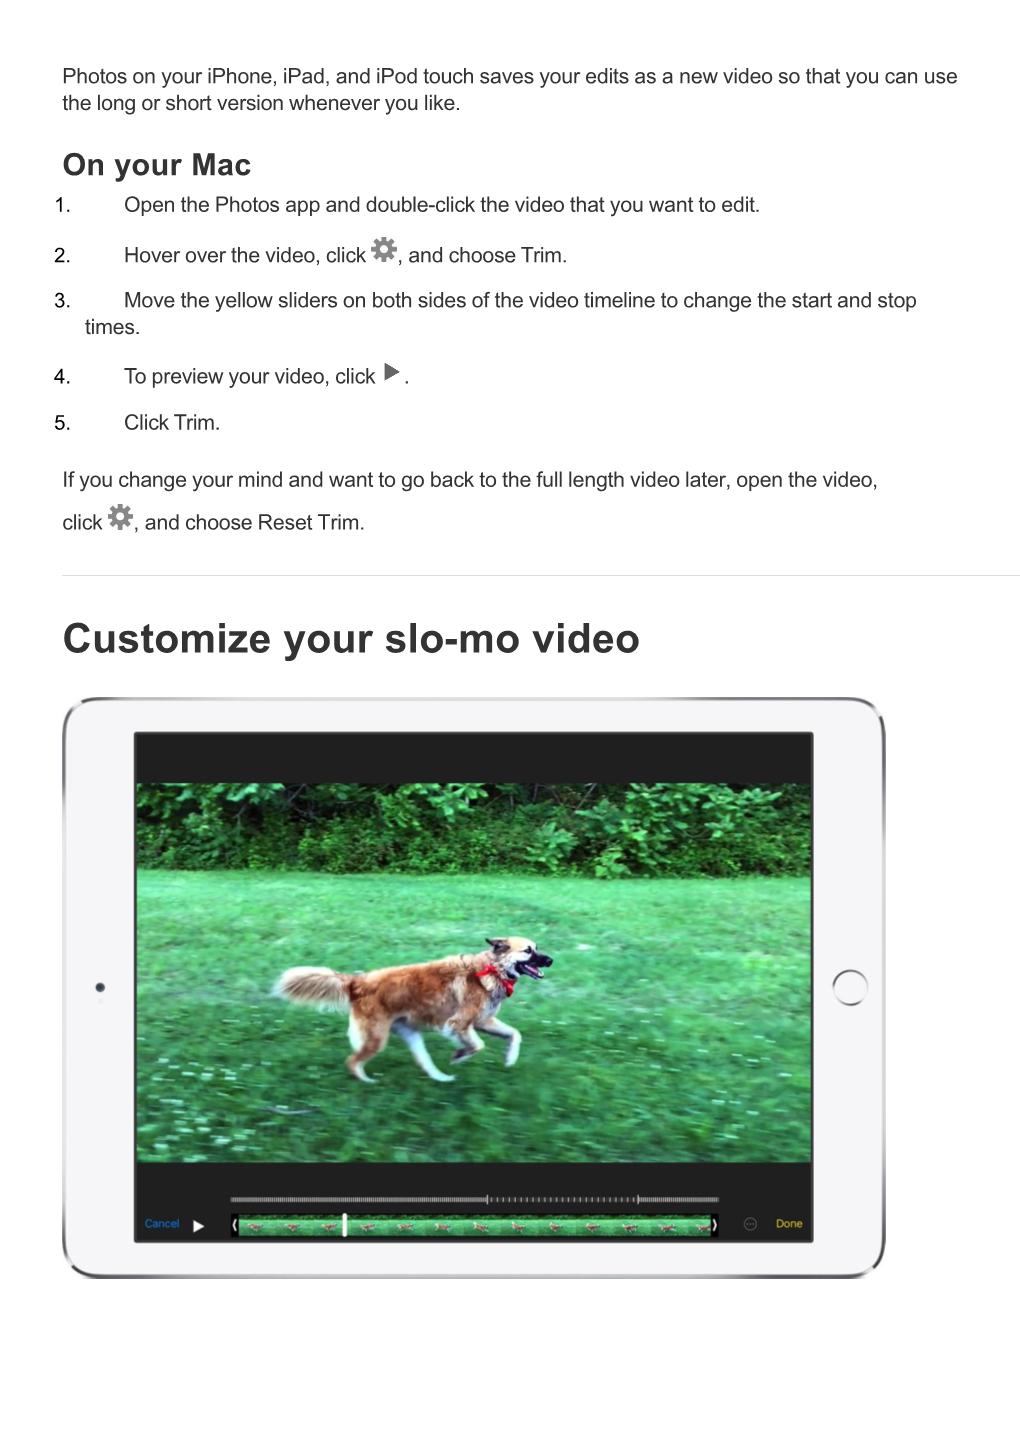 How to Edit Videos on Your Iphone, Ipad, Ipod Touch Or Mac